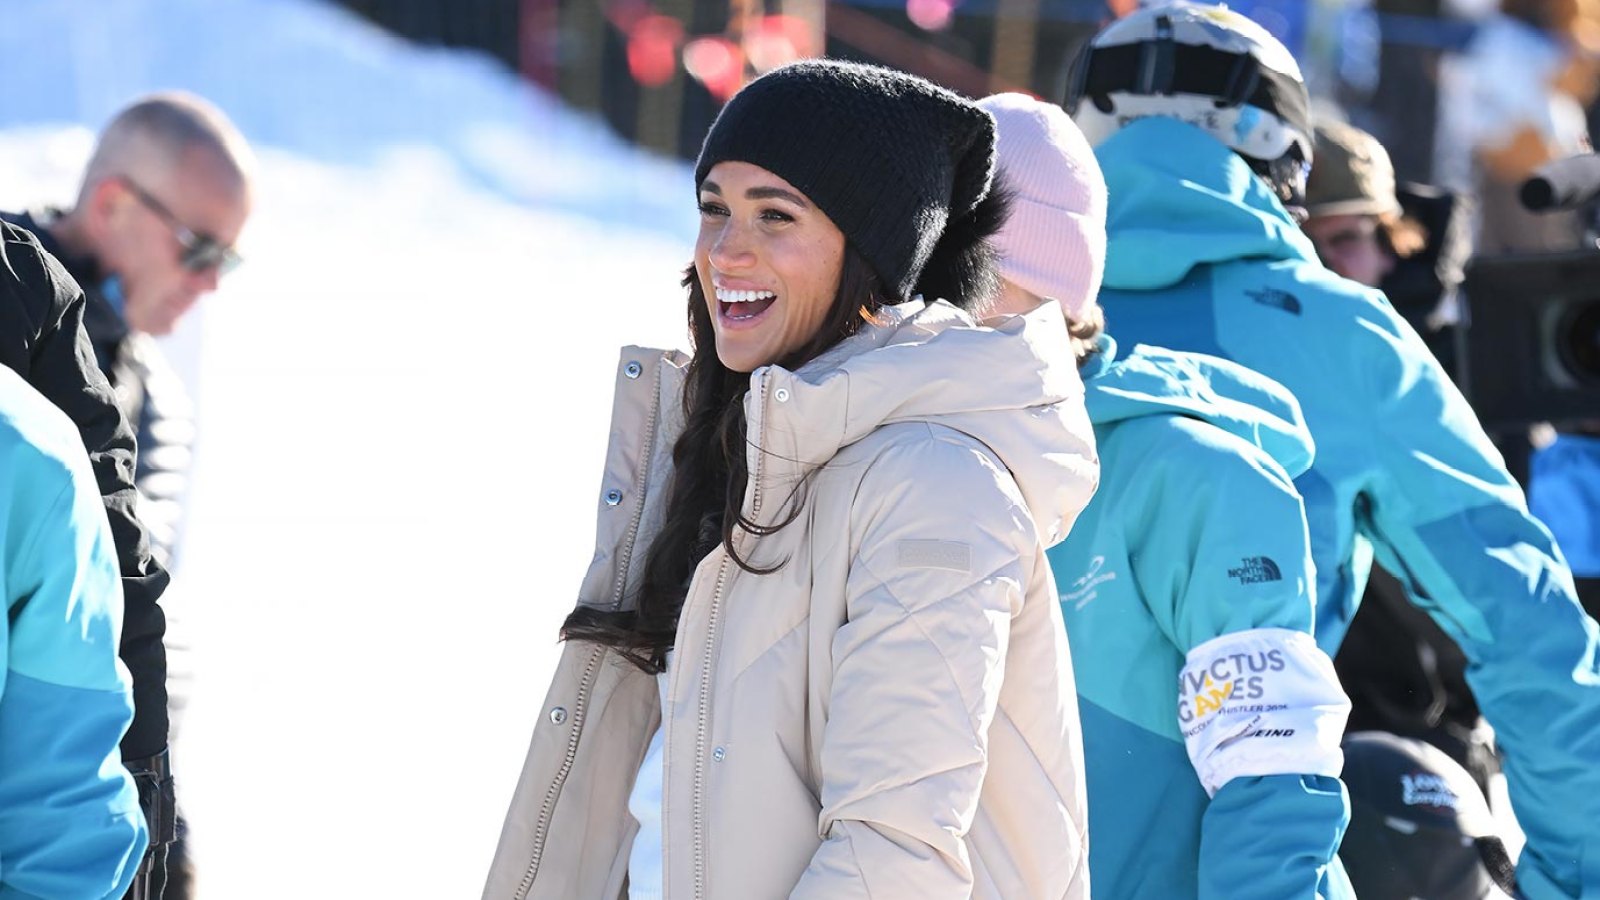 Meghan Markle Hits the Slopes With Friends 2